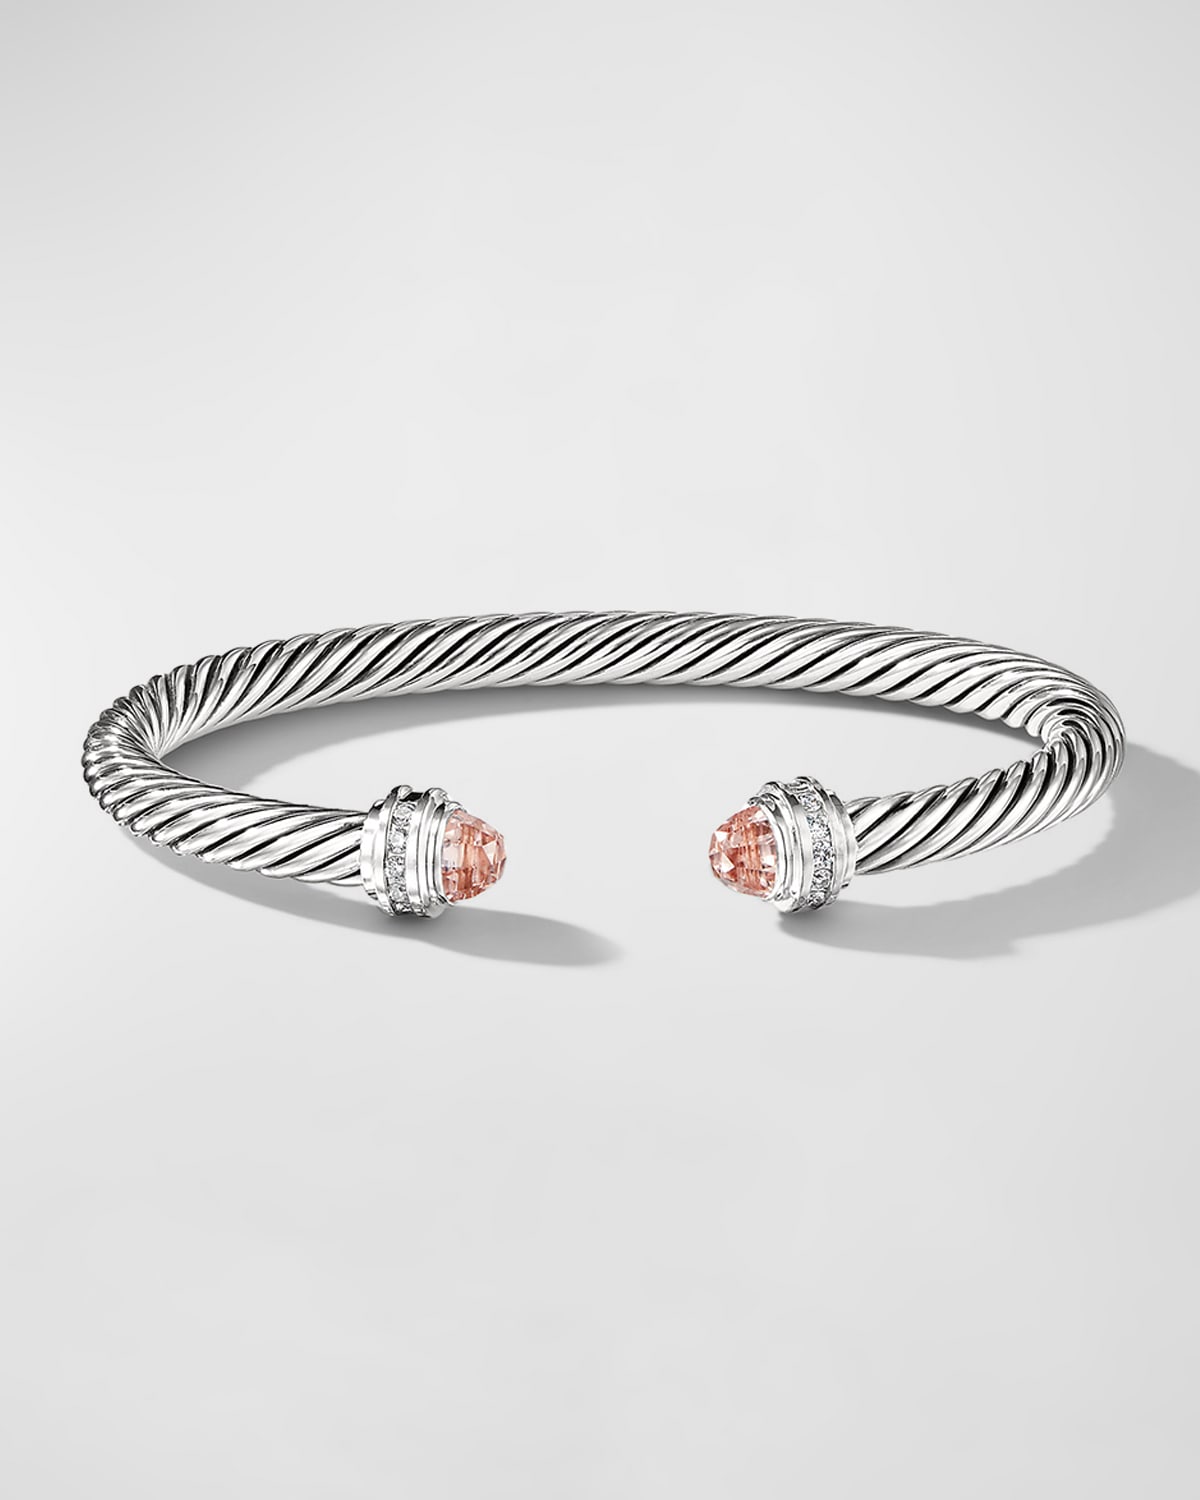 Cable Bracelet with Gemstones in Silver, 5mm